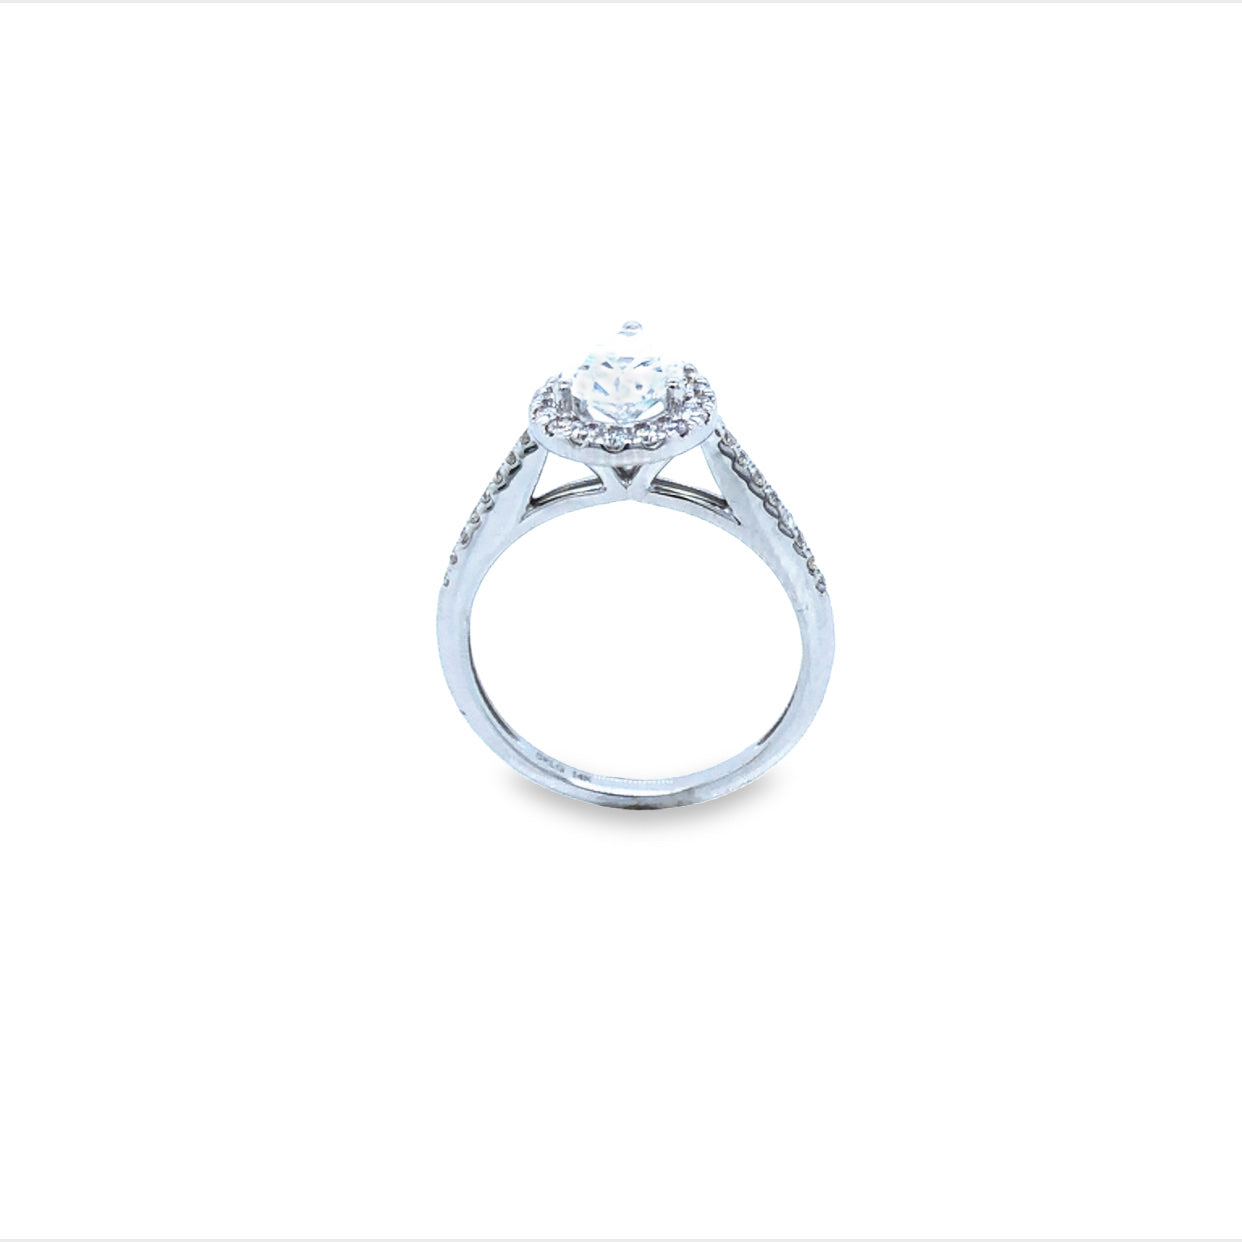 14Ct White Gold Lab Grown Pear Shaped Halo Diamond Engagement Ring TDW 1.25Ct EVS Has GS Lab Cert